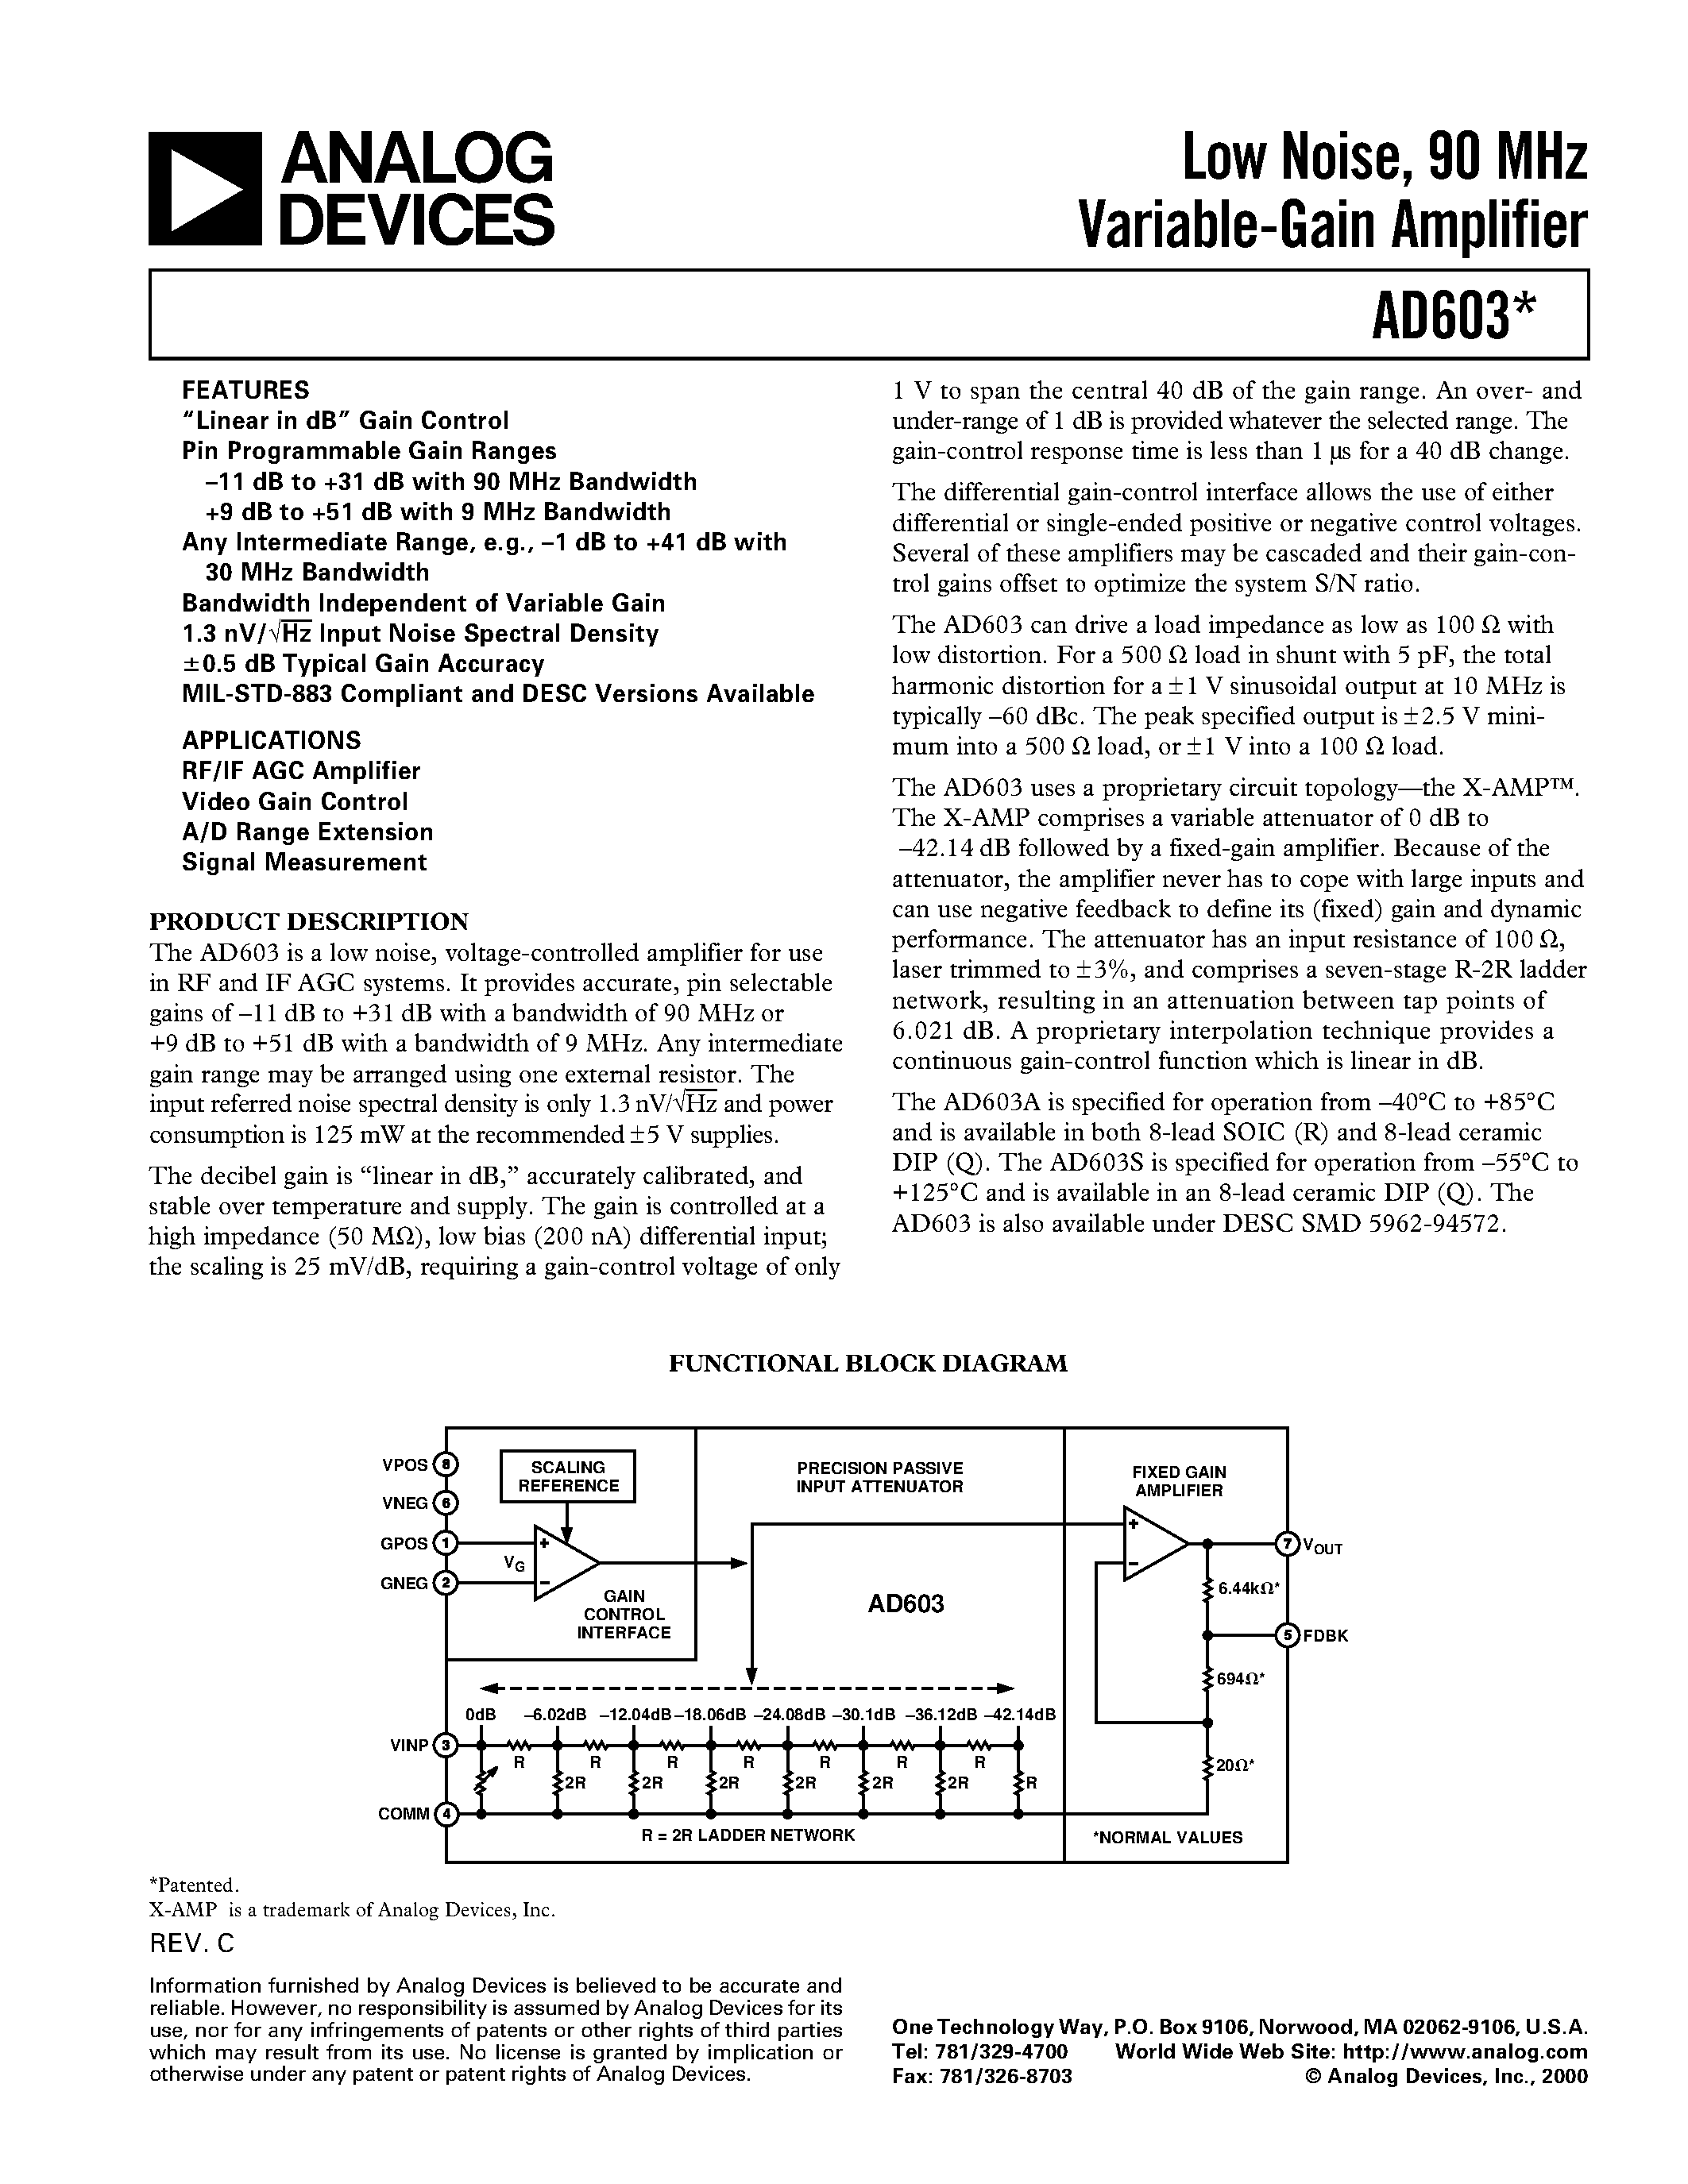 Datasheet AD603AR - Low Noise/ 90 MHz Variable-Gain Amplifier page 1